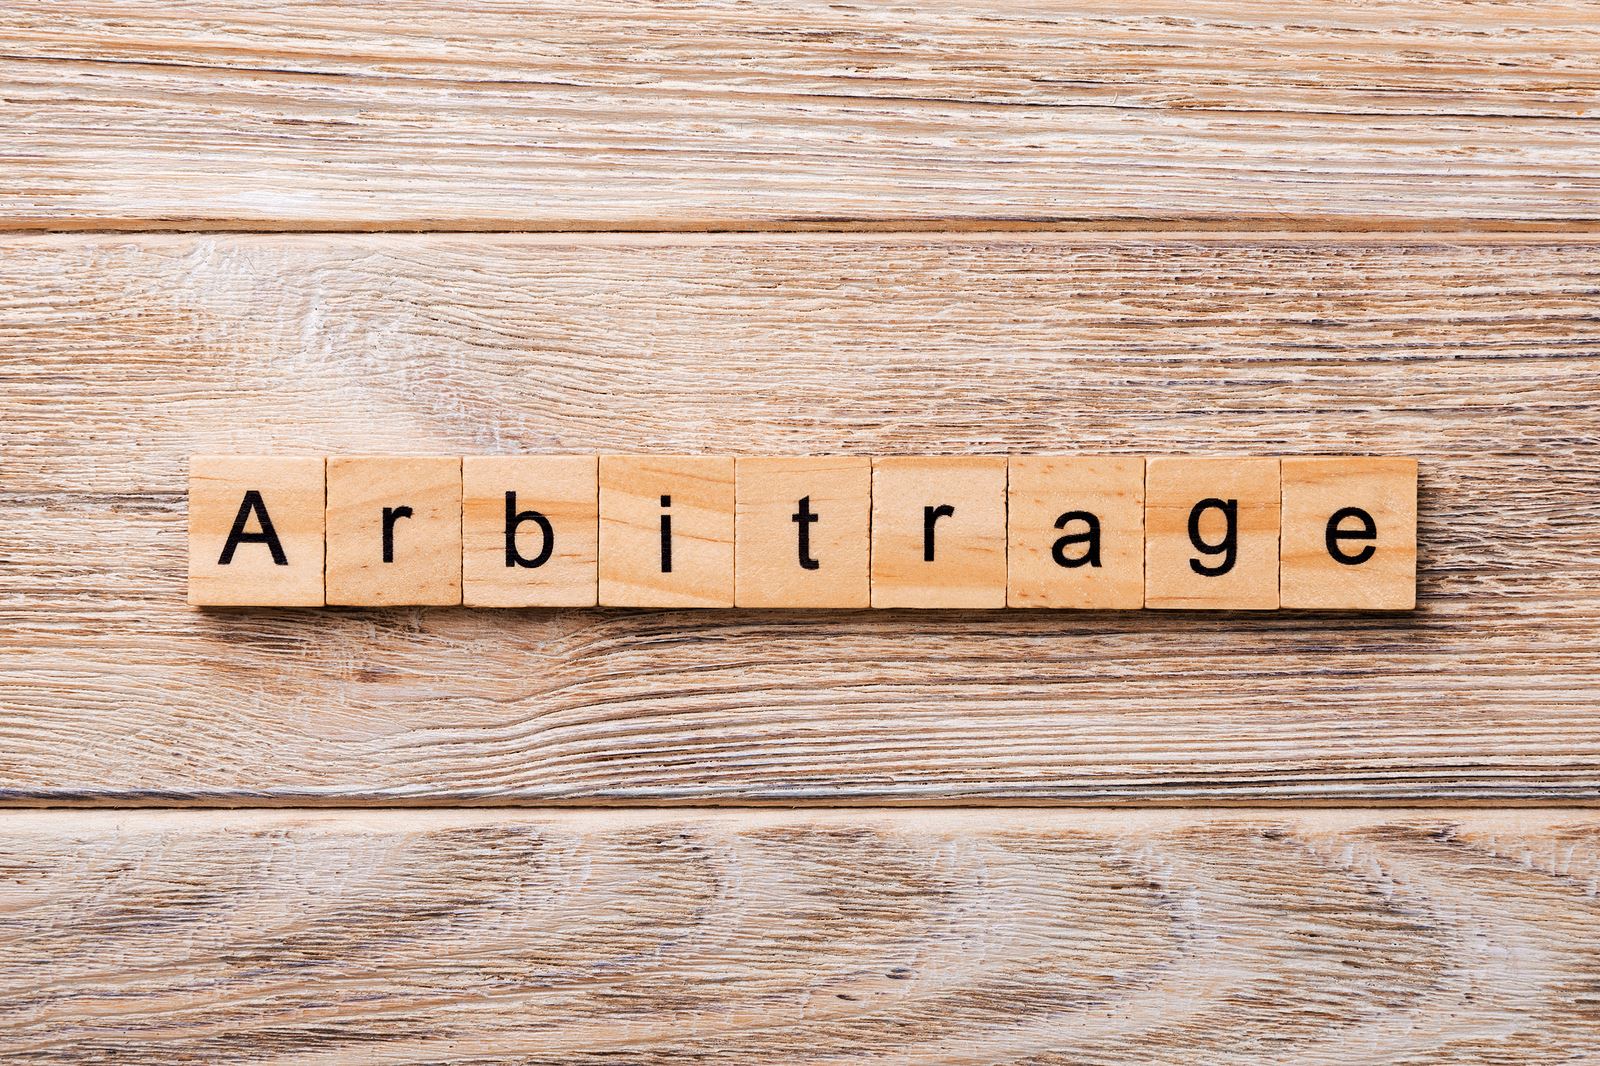 Rental Arbitrage is What Makes Airbnb Work - Learn What It Is